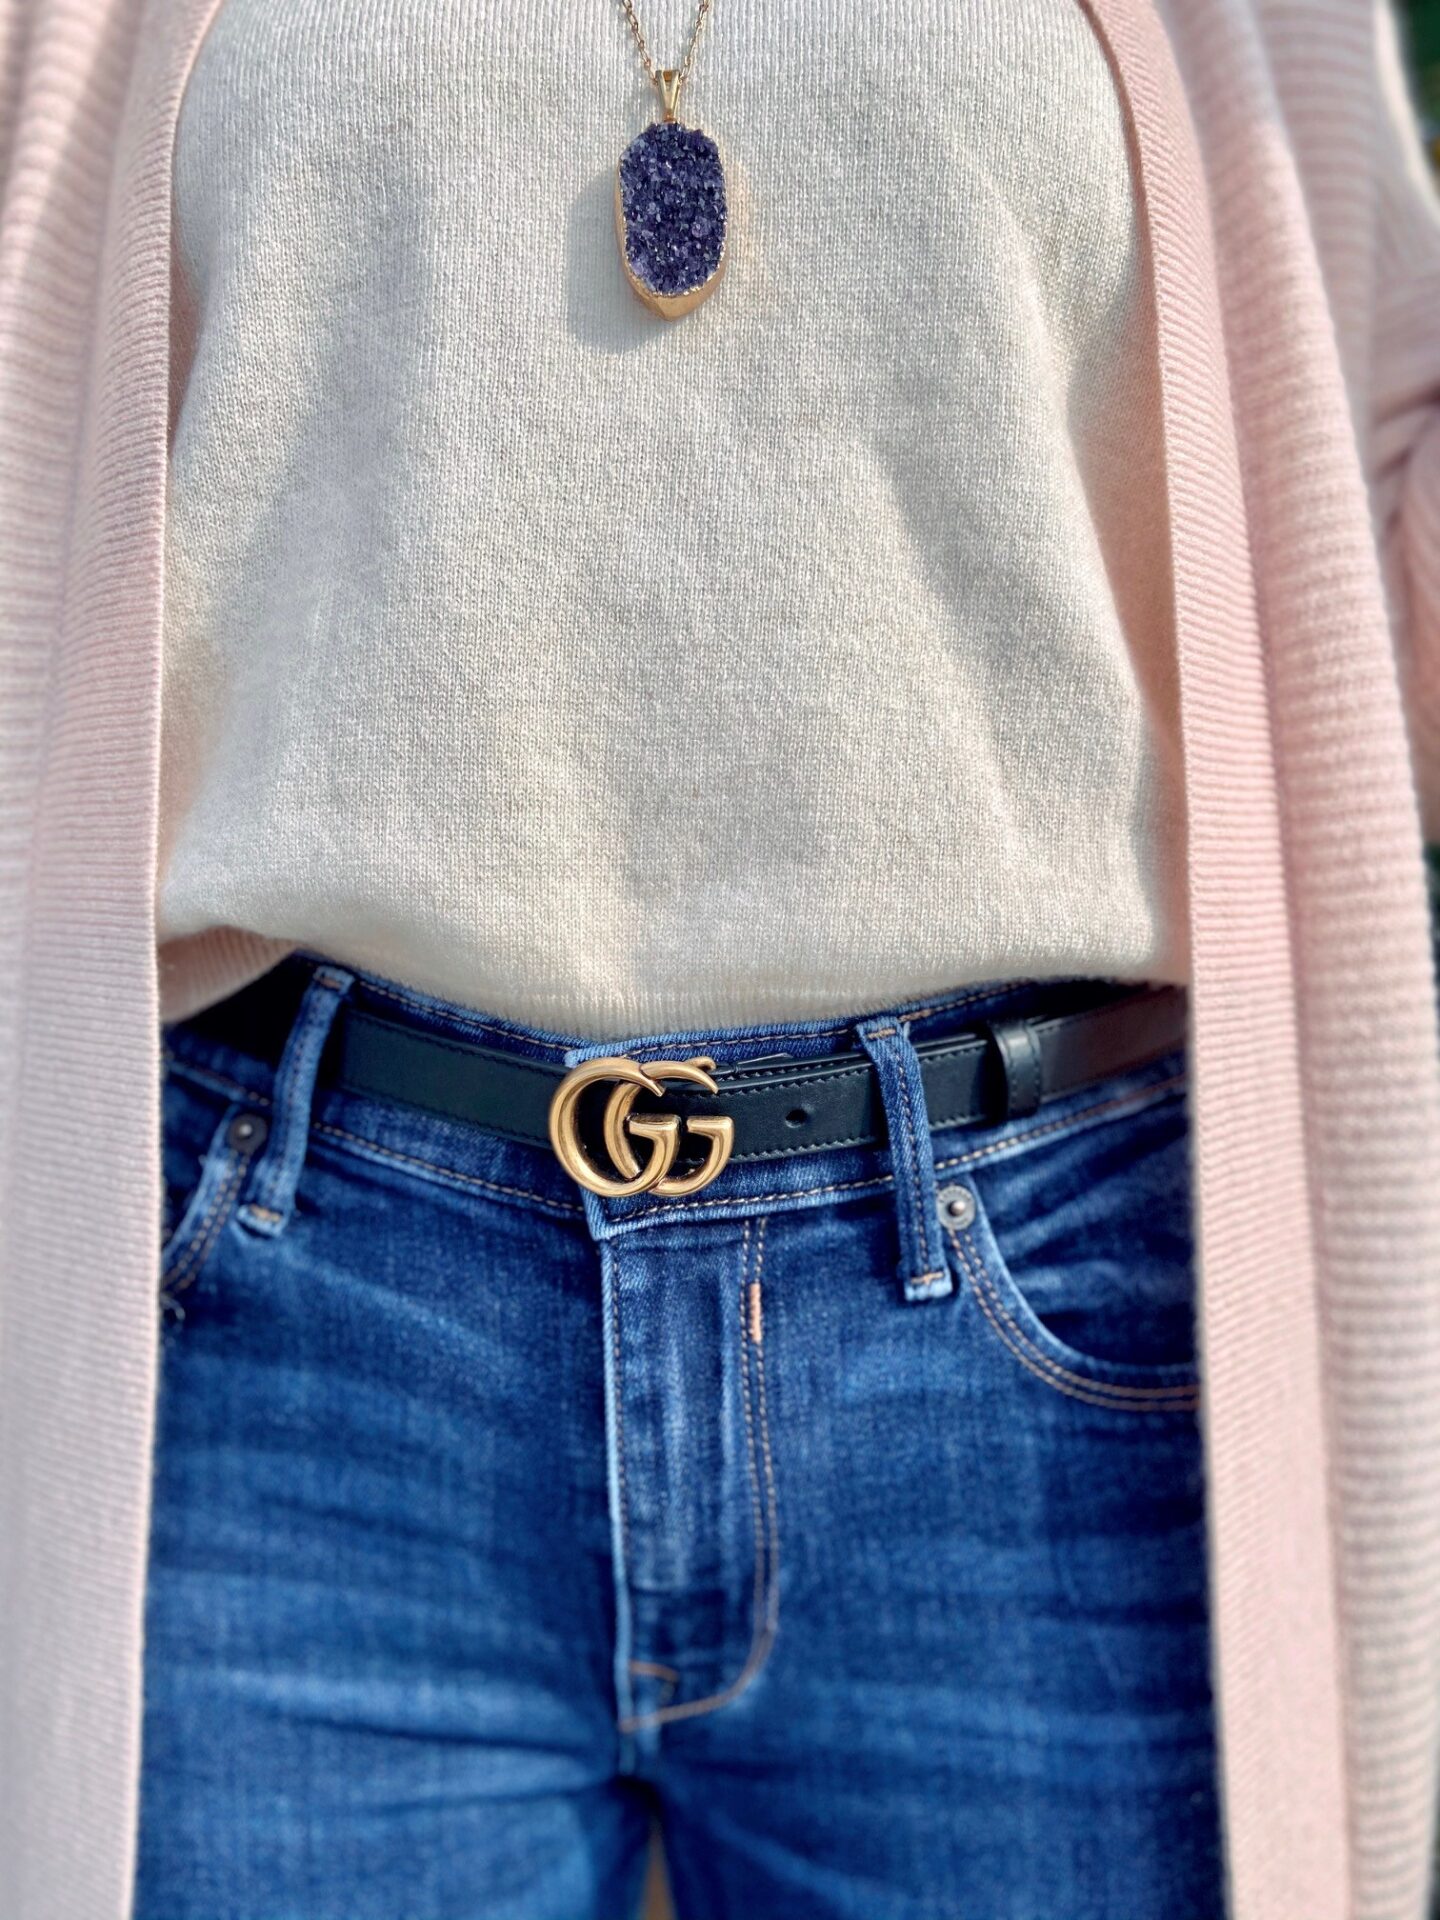 tapijt Sovjet Ziek persoon Review: Is the Gucci Belt Overrated? - Allure By Tess Fashion Blog